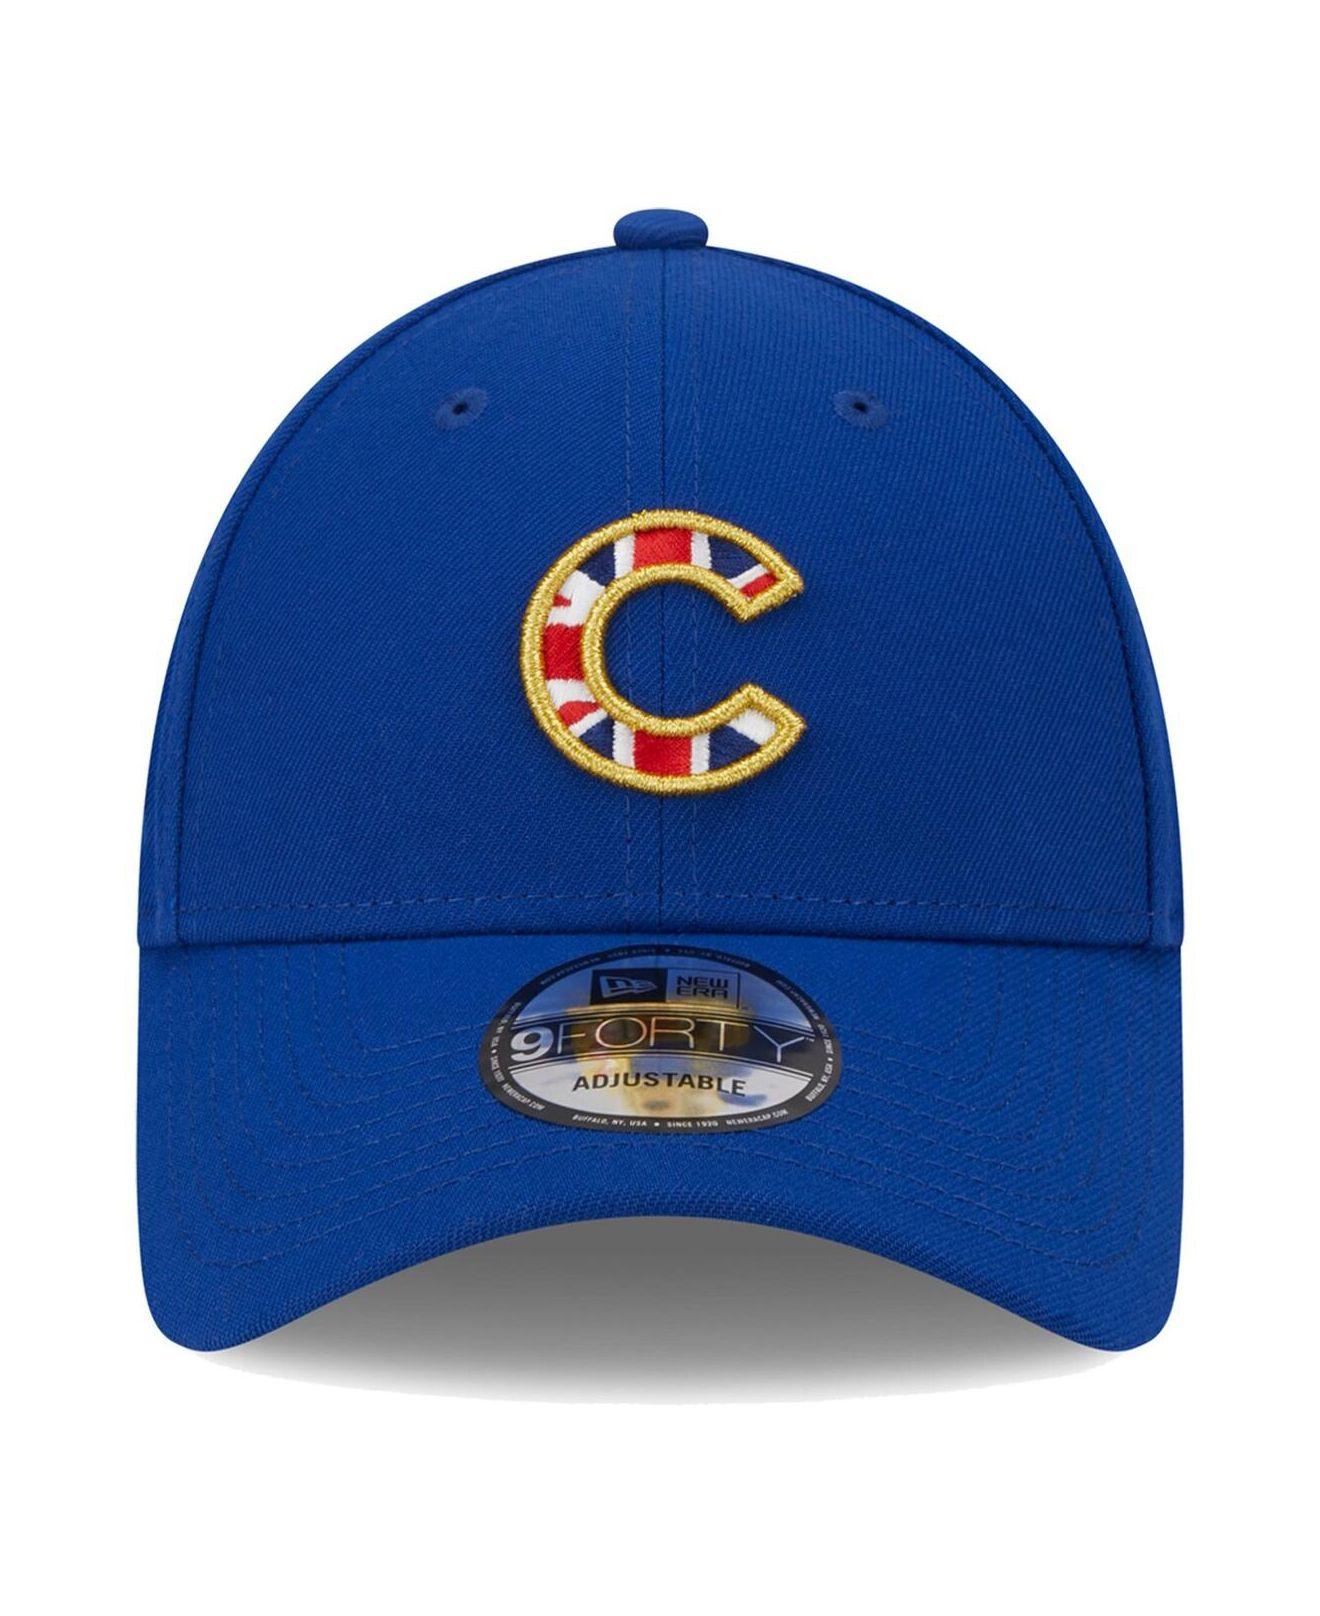 Chicago Cubs MLB London Series Blue 9FORTY Adjustable Cap